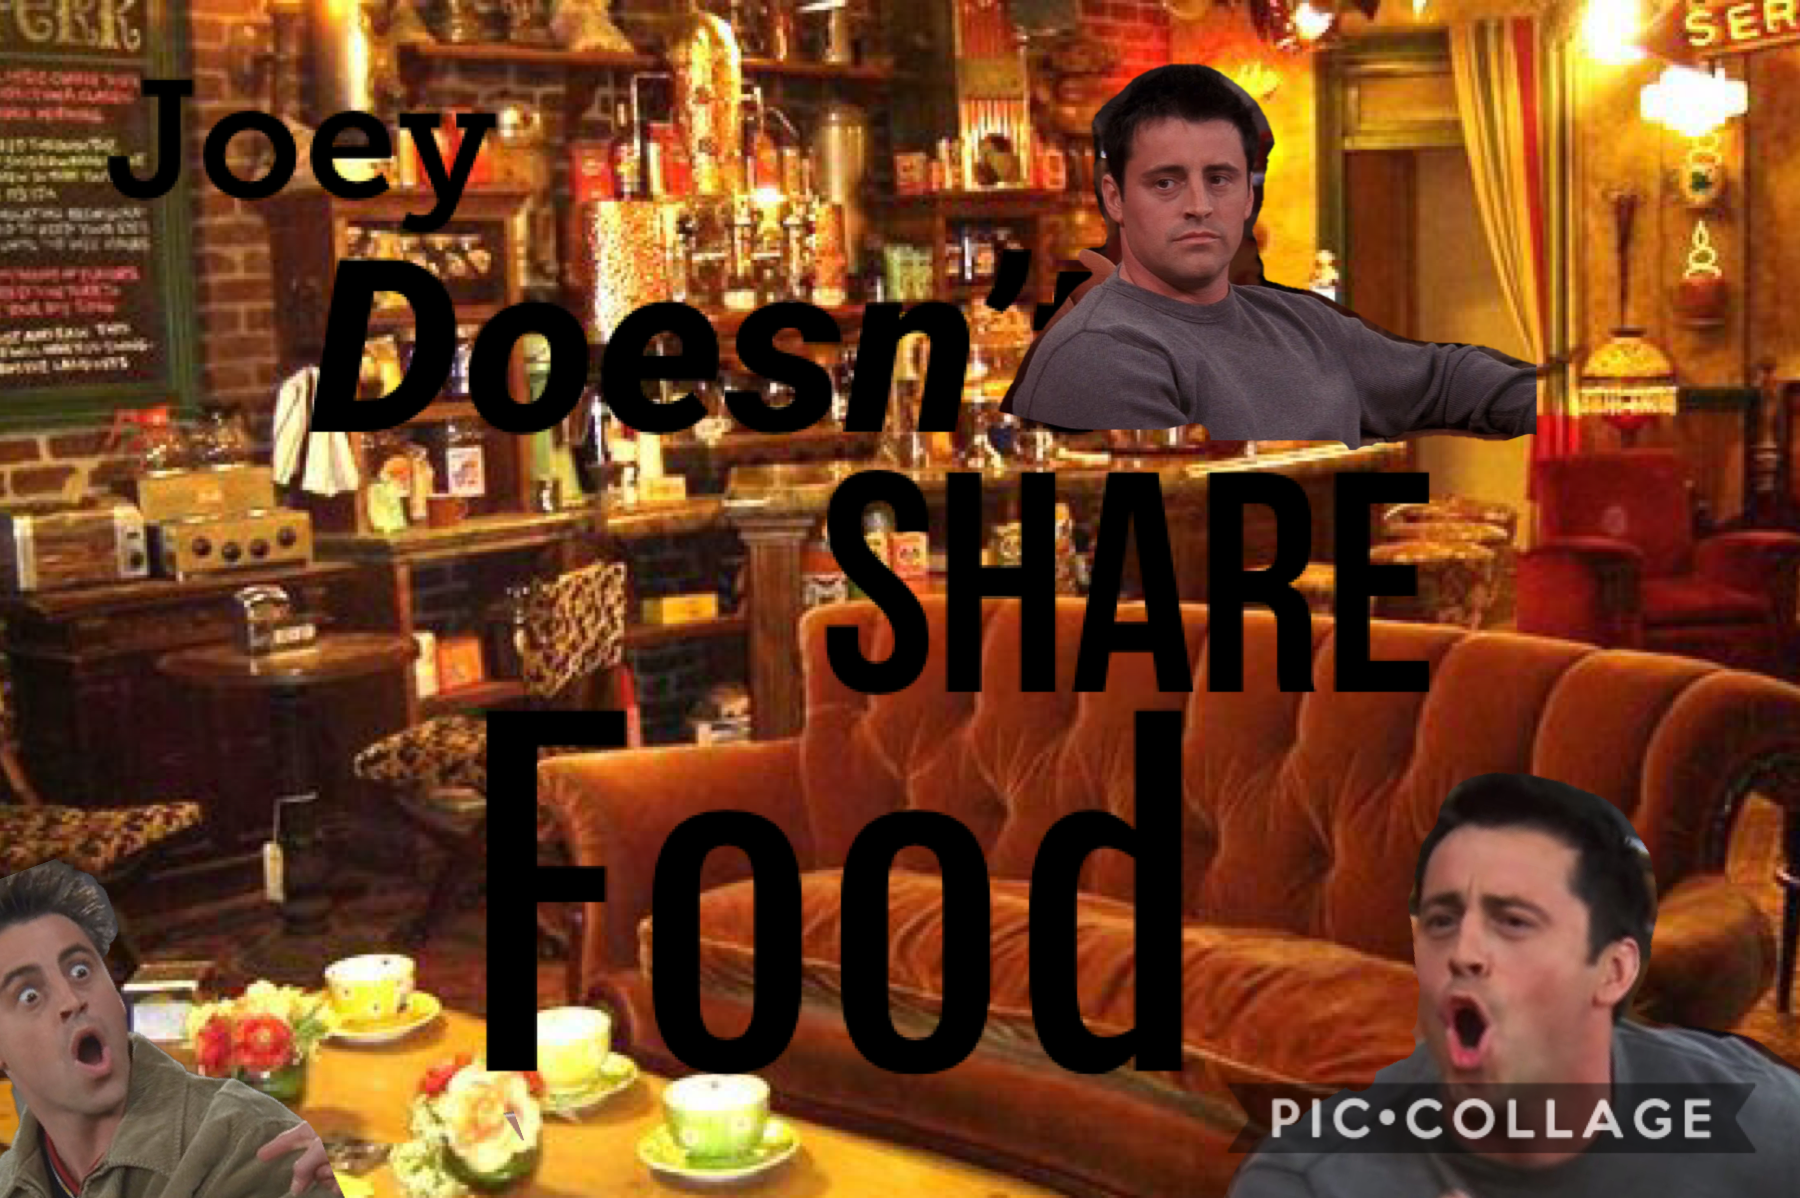 Joey doesn’t share food